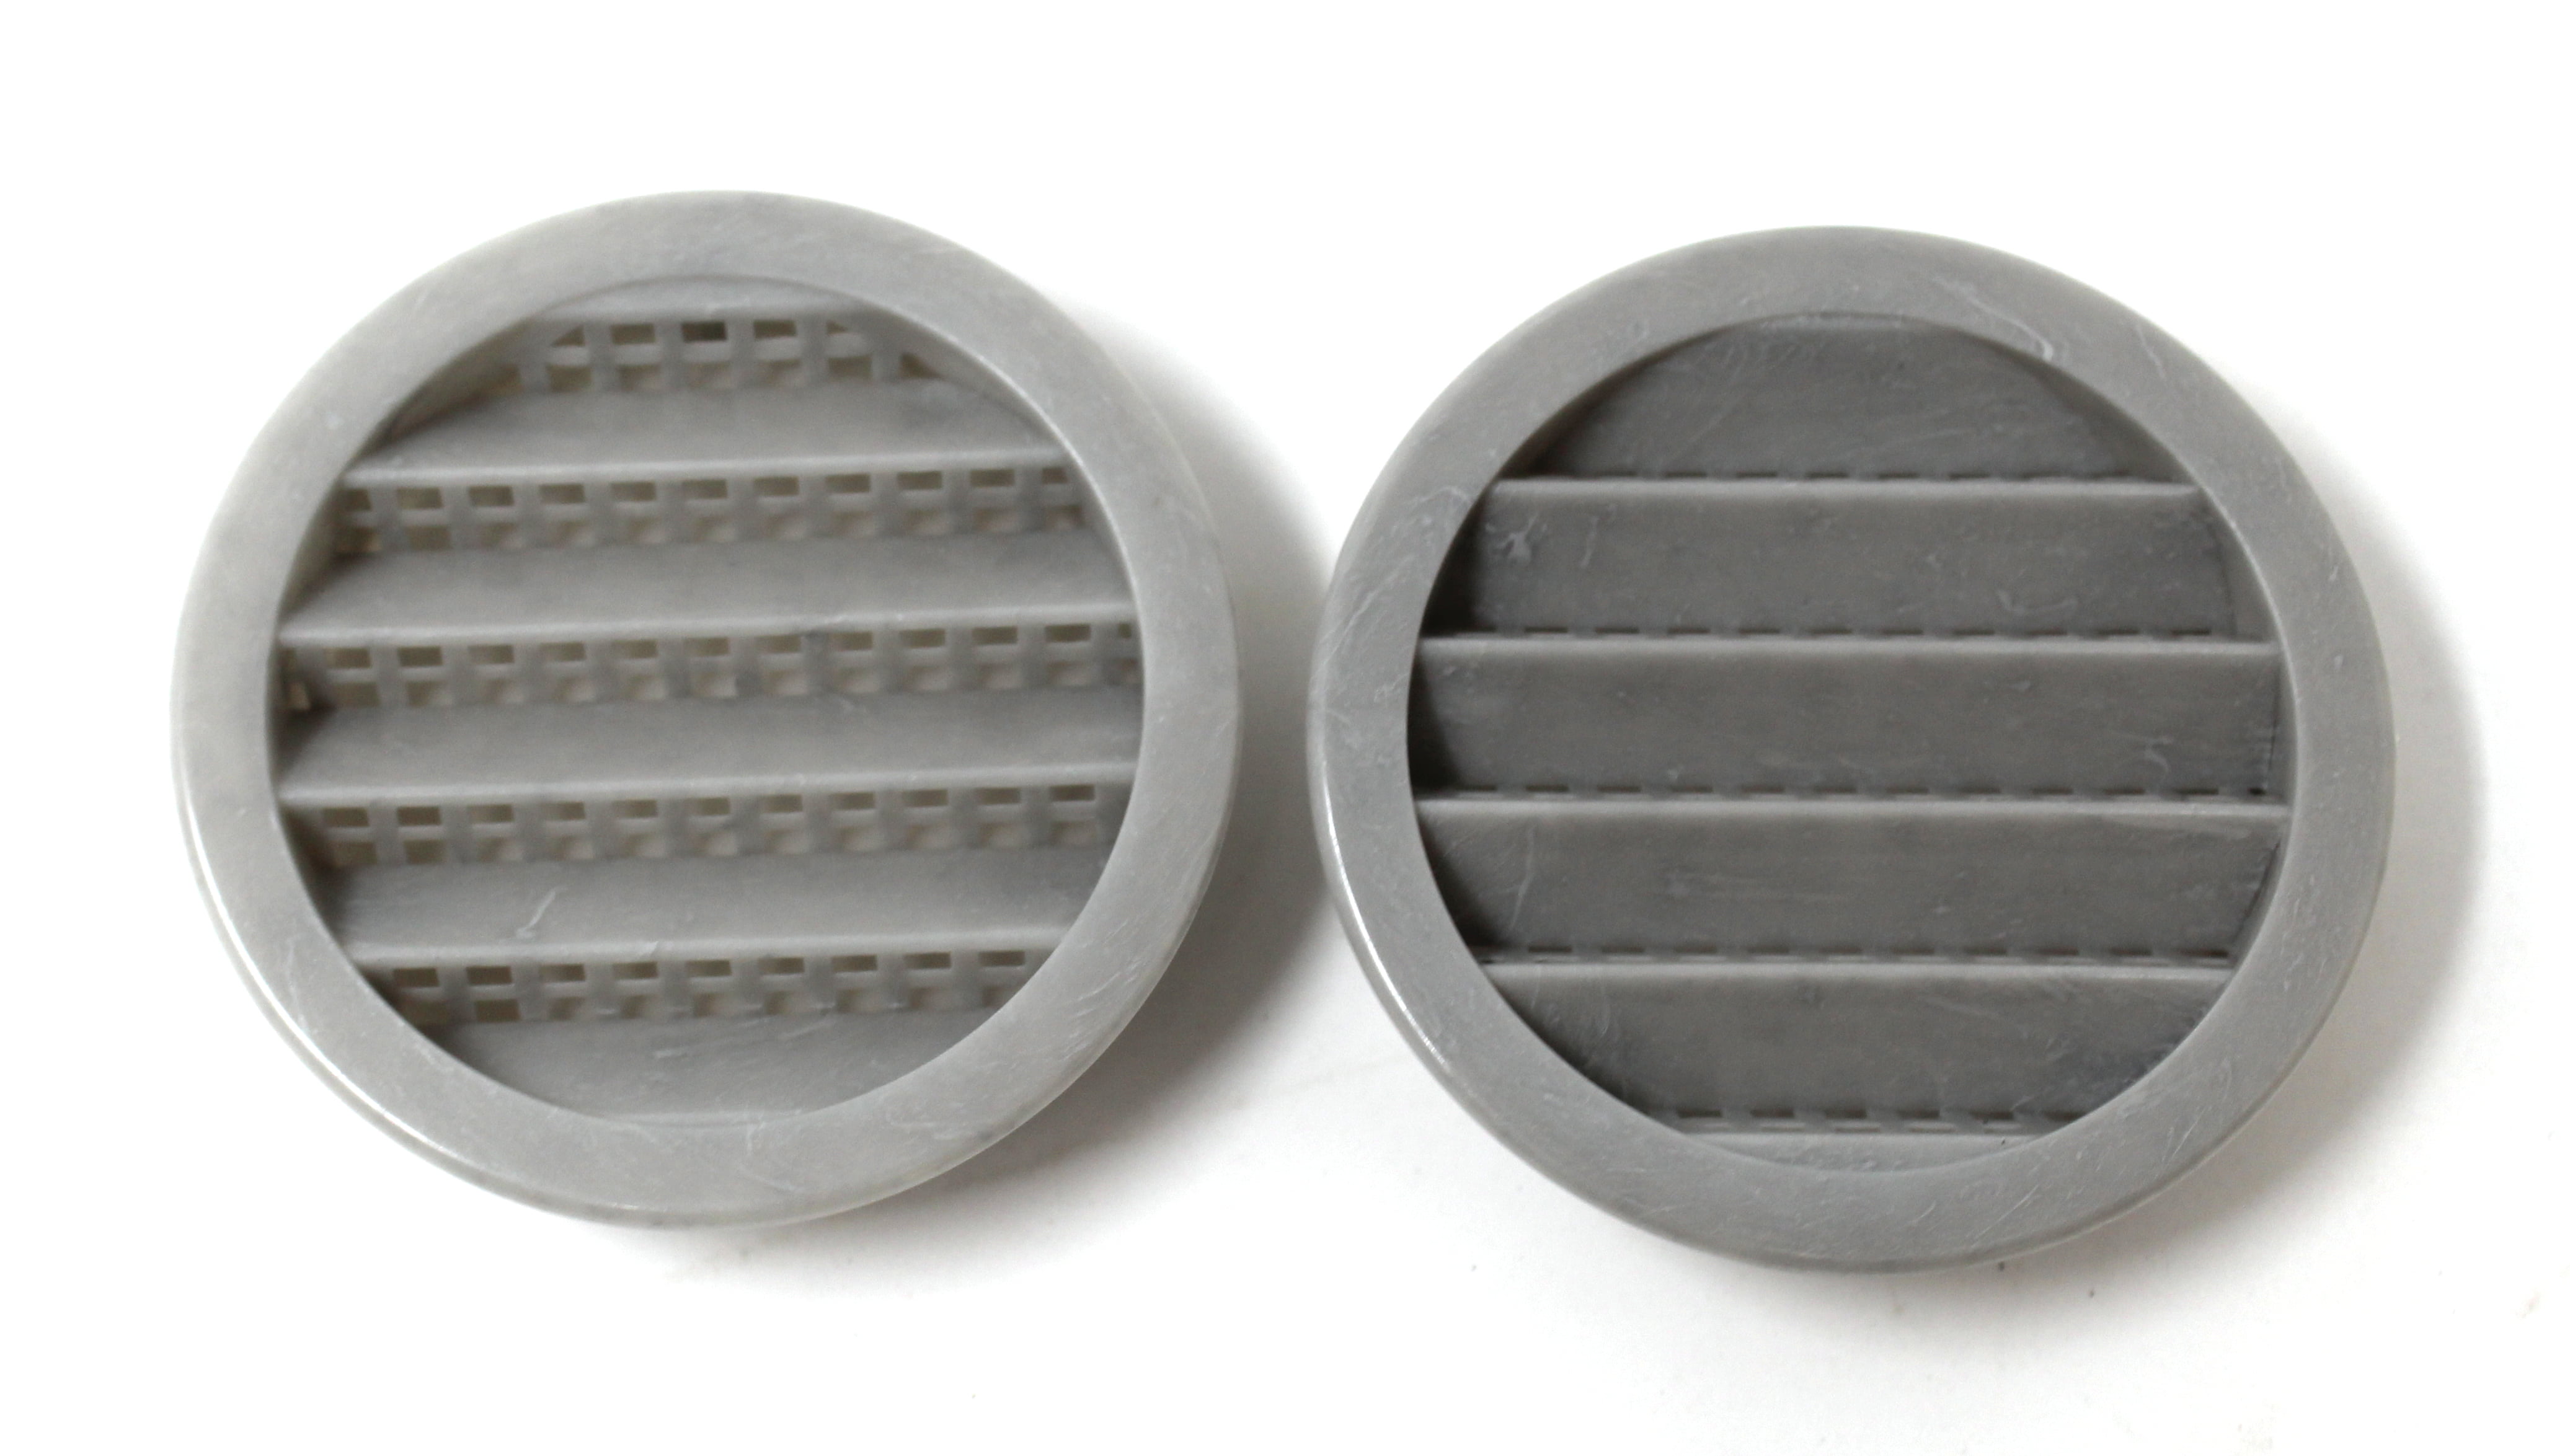 AIR VENT COVER PLASTIC GILLE 170x40mm Gray - LCC